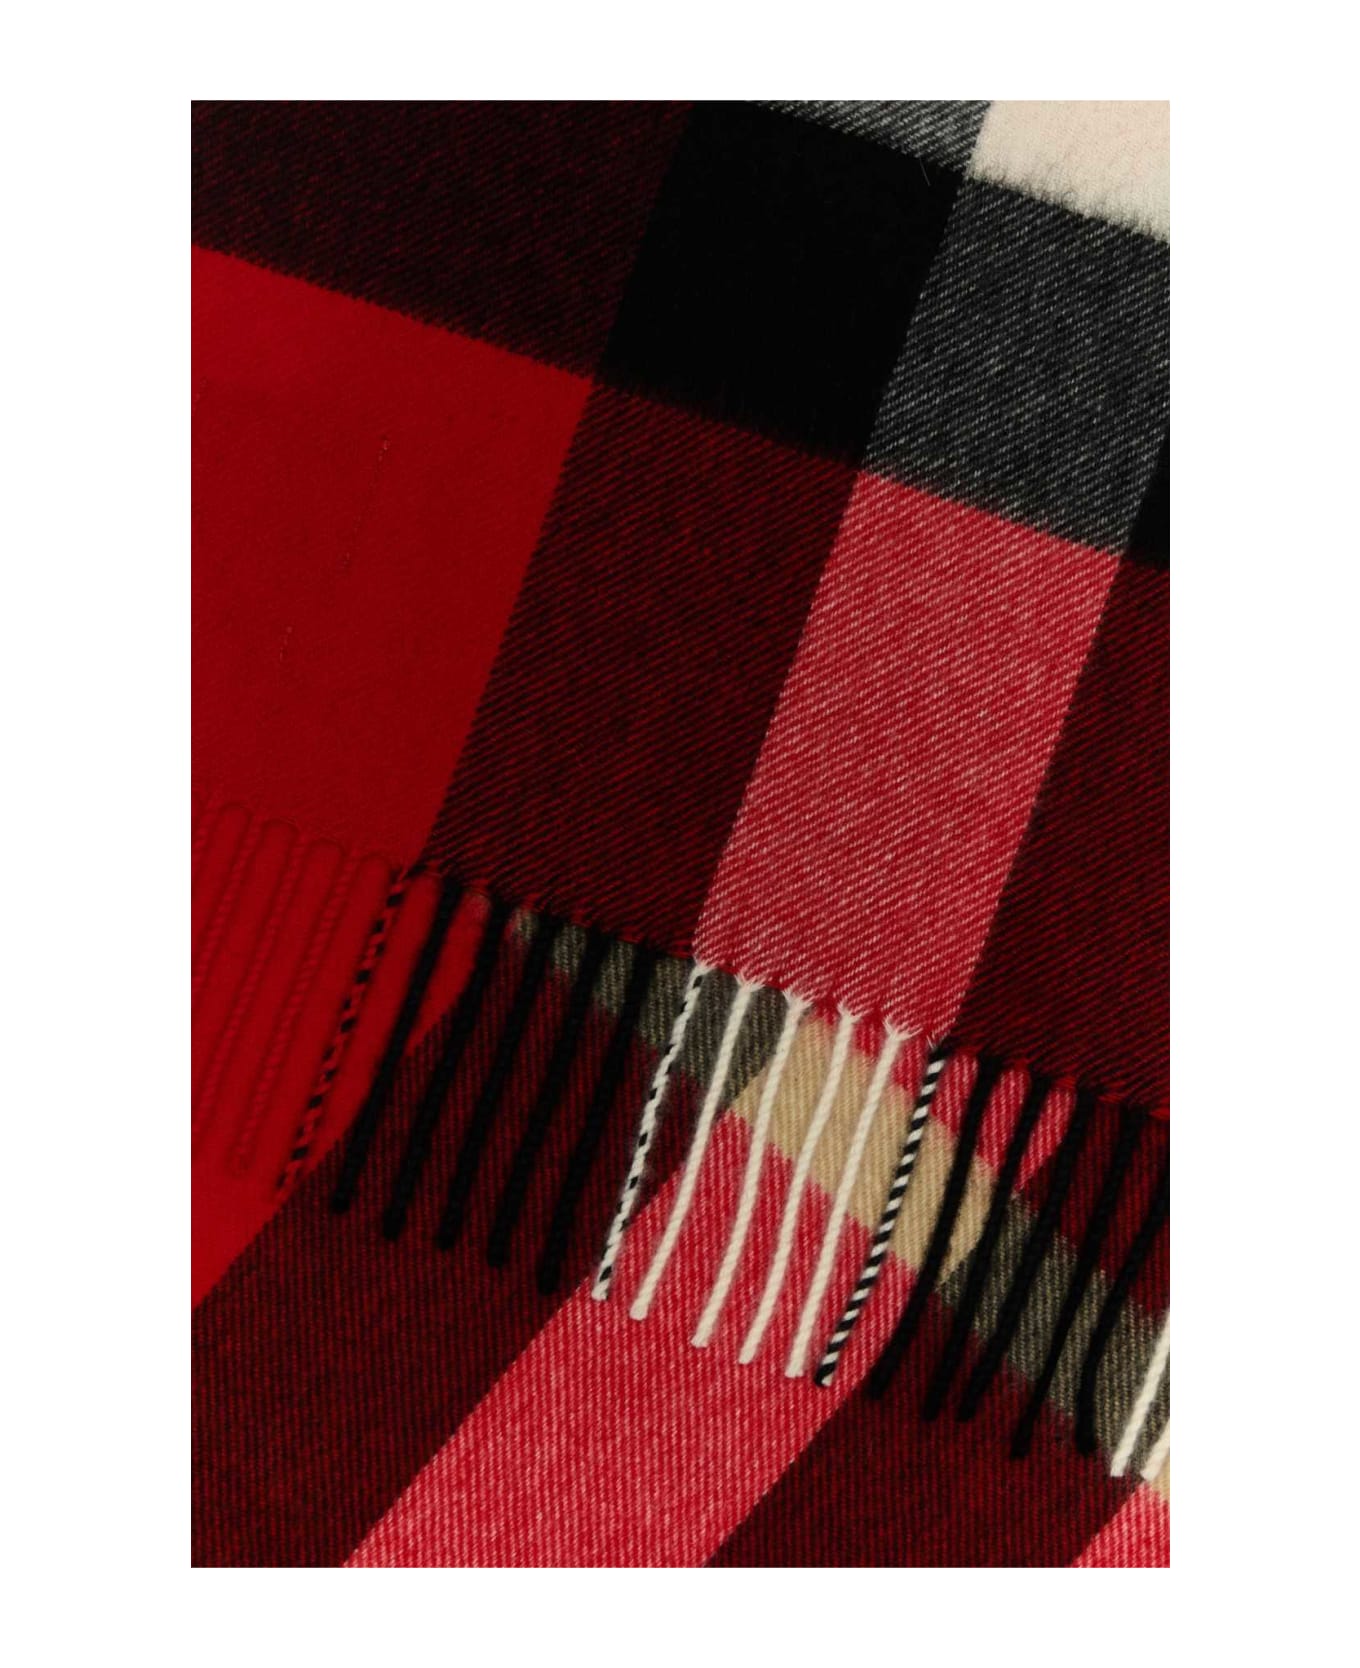 Burberry Embroidered Cashmere Scarf - RED スカーフ